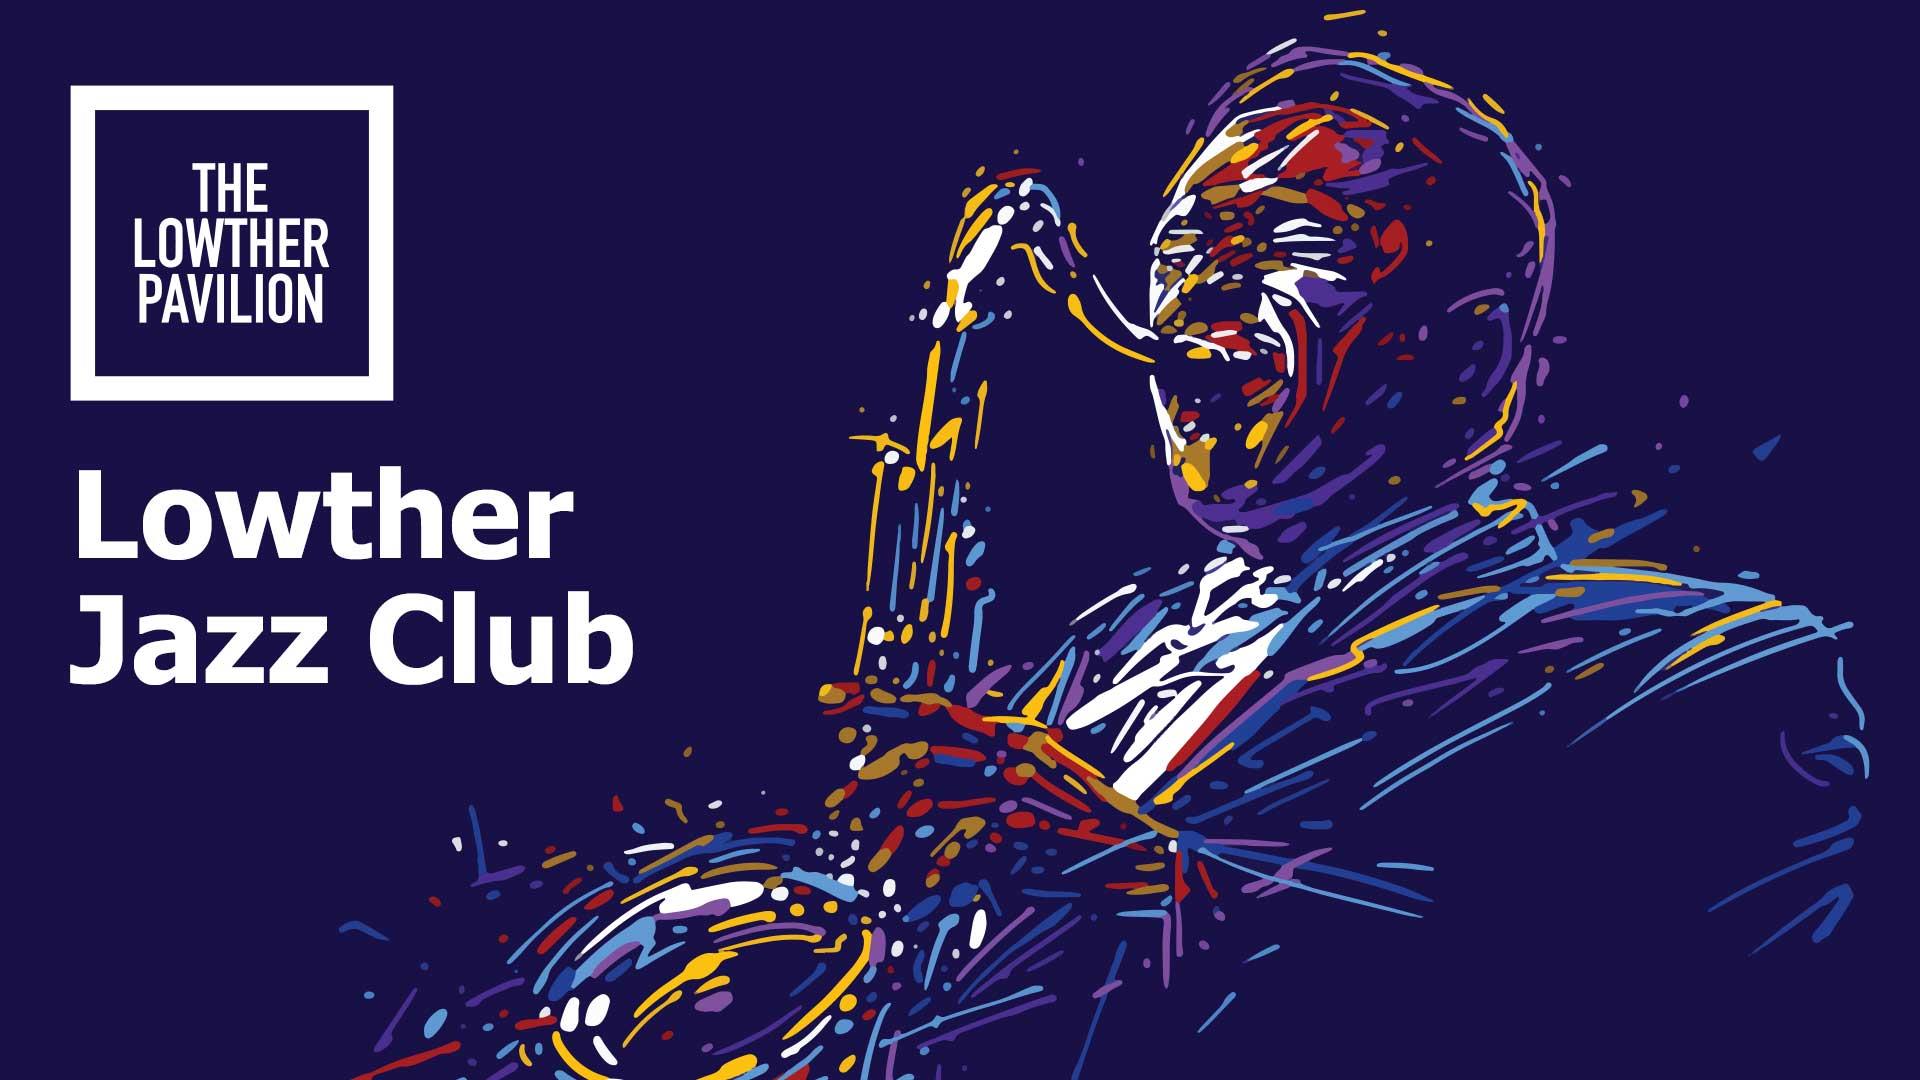 Lowther Jazz Club – April 2022 - Lowther Pavilion